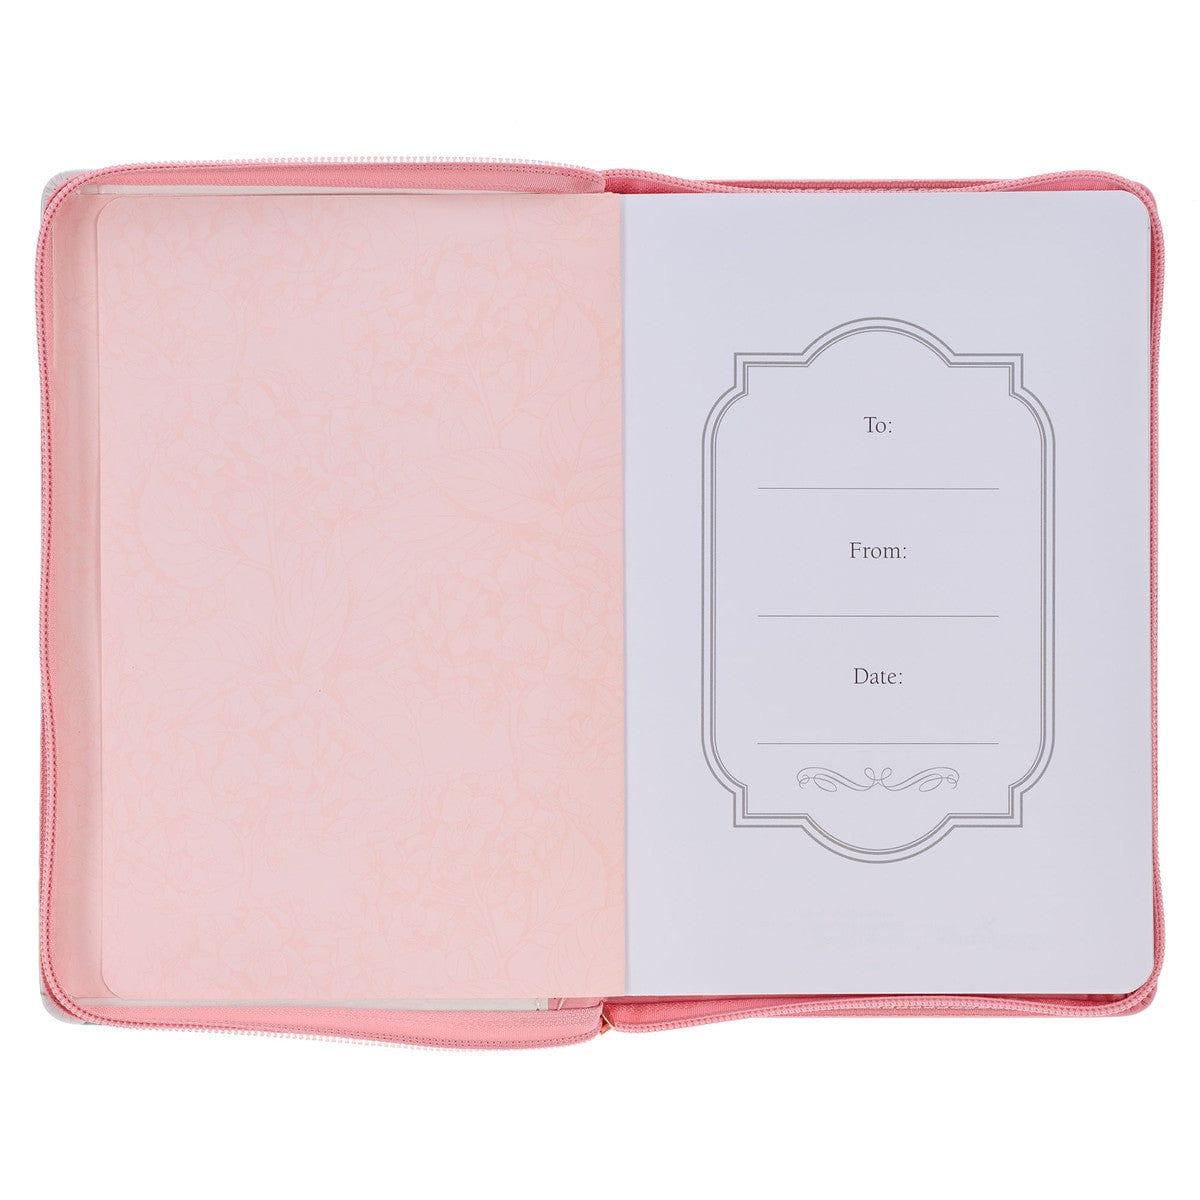 The Plans Pink Bouquet Faux Leather Classic Journal with Zippered Closure - Jeremiah 29:11 - Pura Vida Books